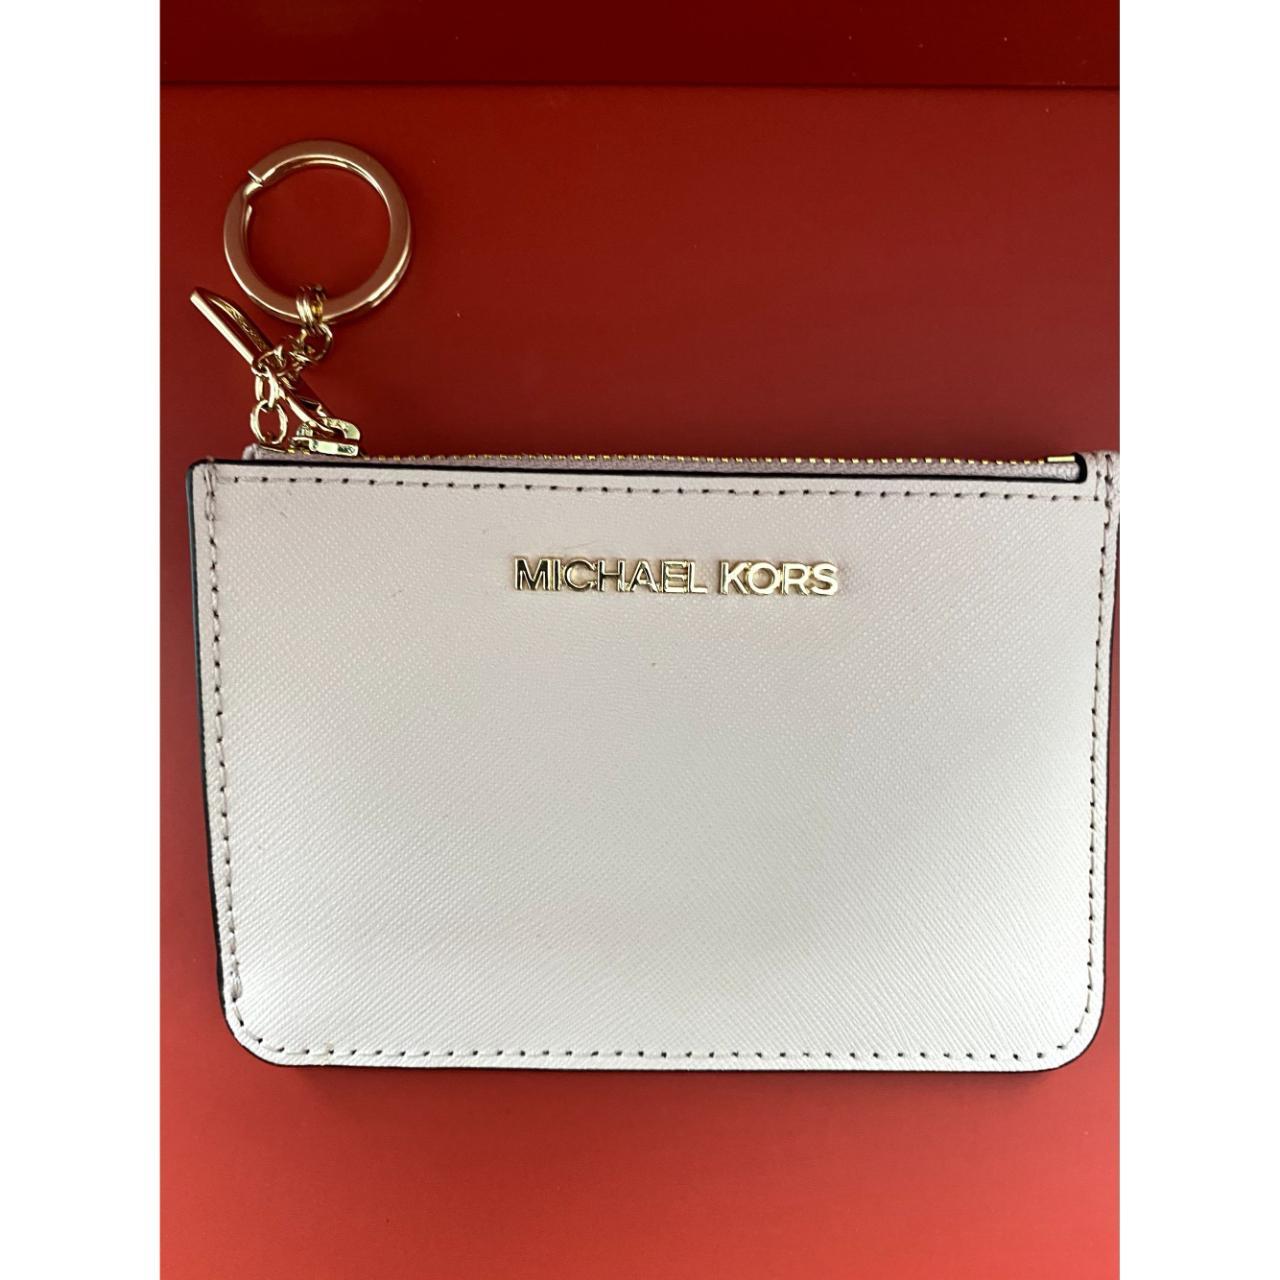 Michael Kors Jet Set Travel Small Top Zip Coin Pouch with ID Card Holder  and Ring in Pink Saffiano Leather  Unisex ID Case  Lazada PH